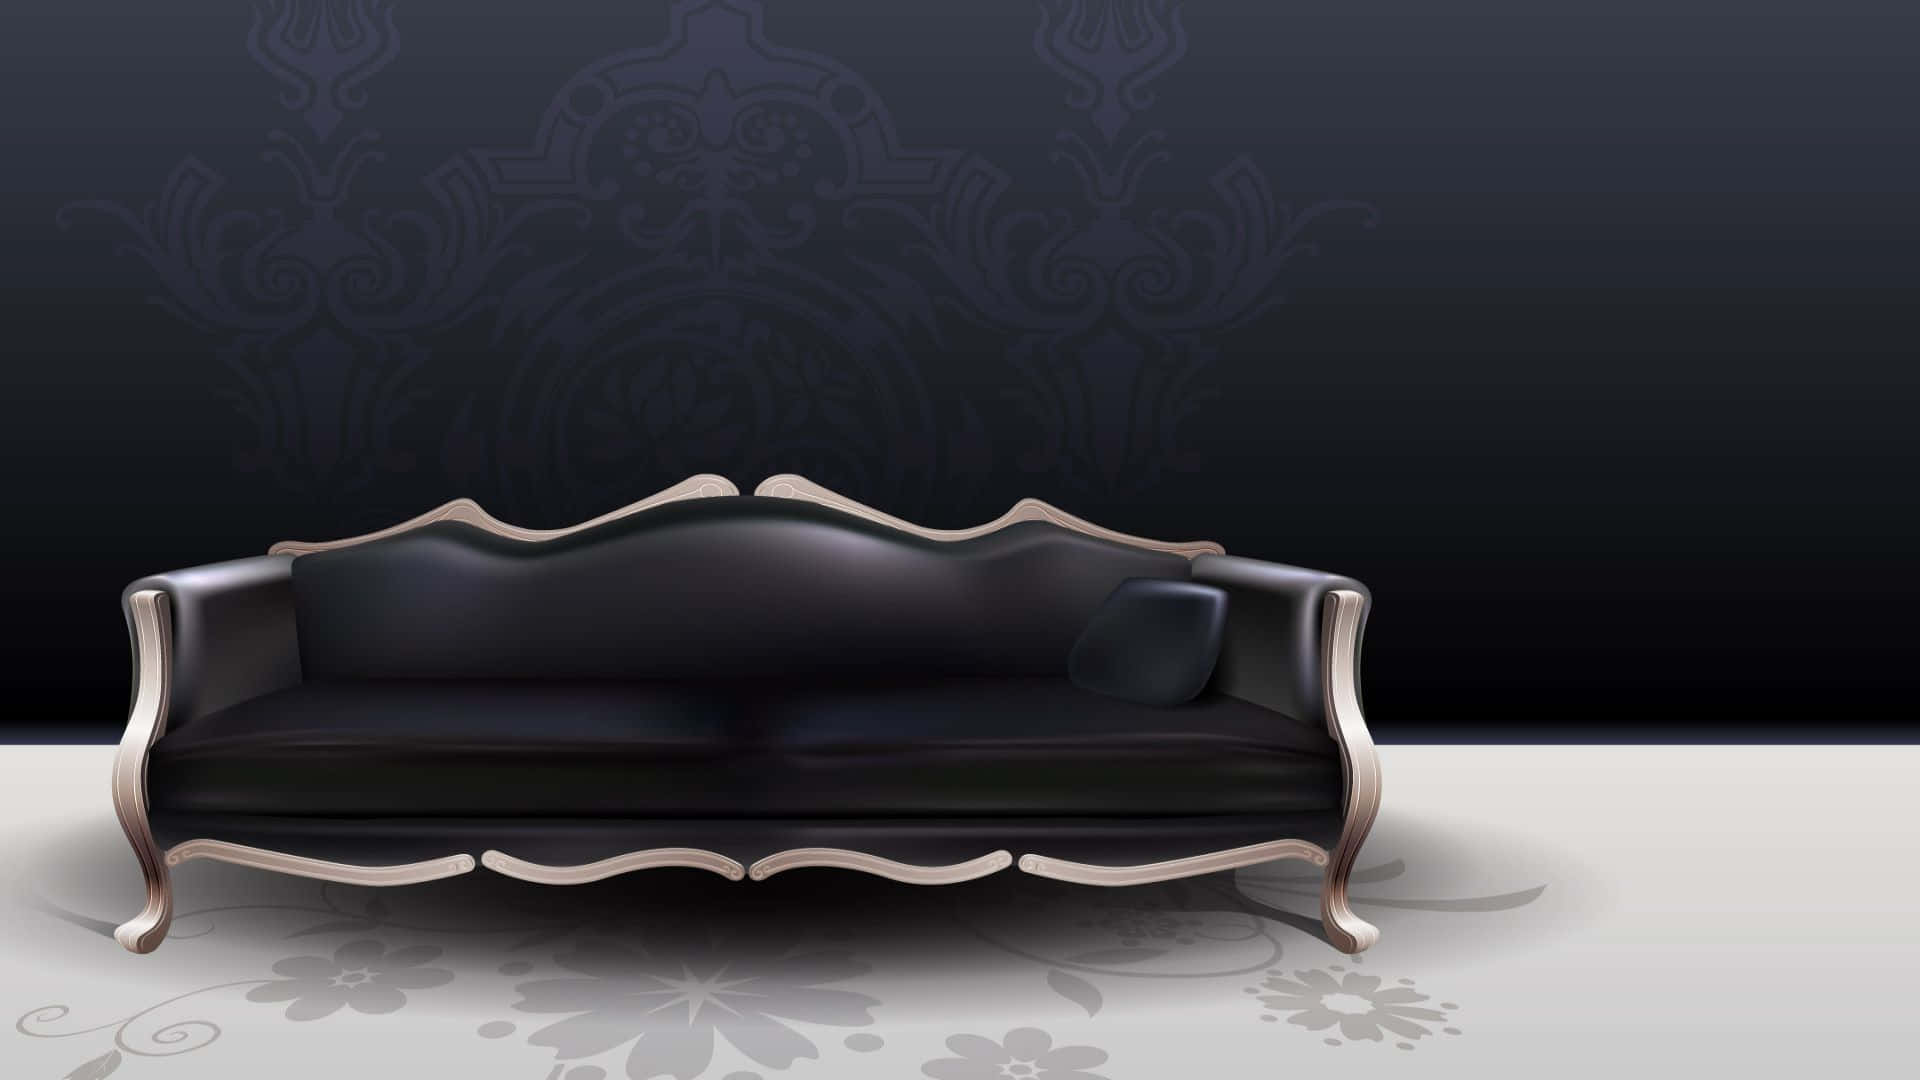 Download Pitch Black Couch Design Wallpaper 